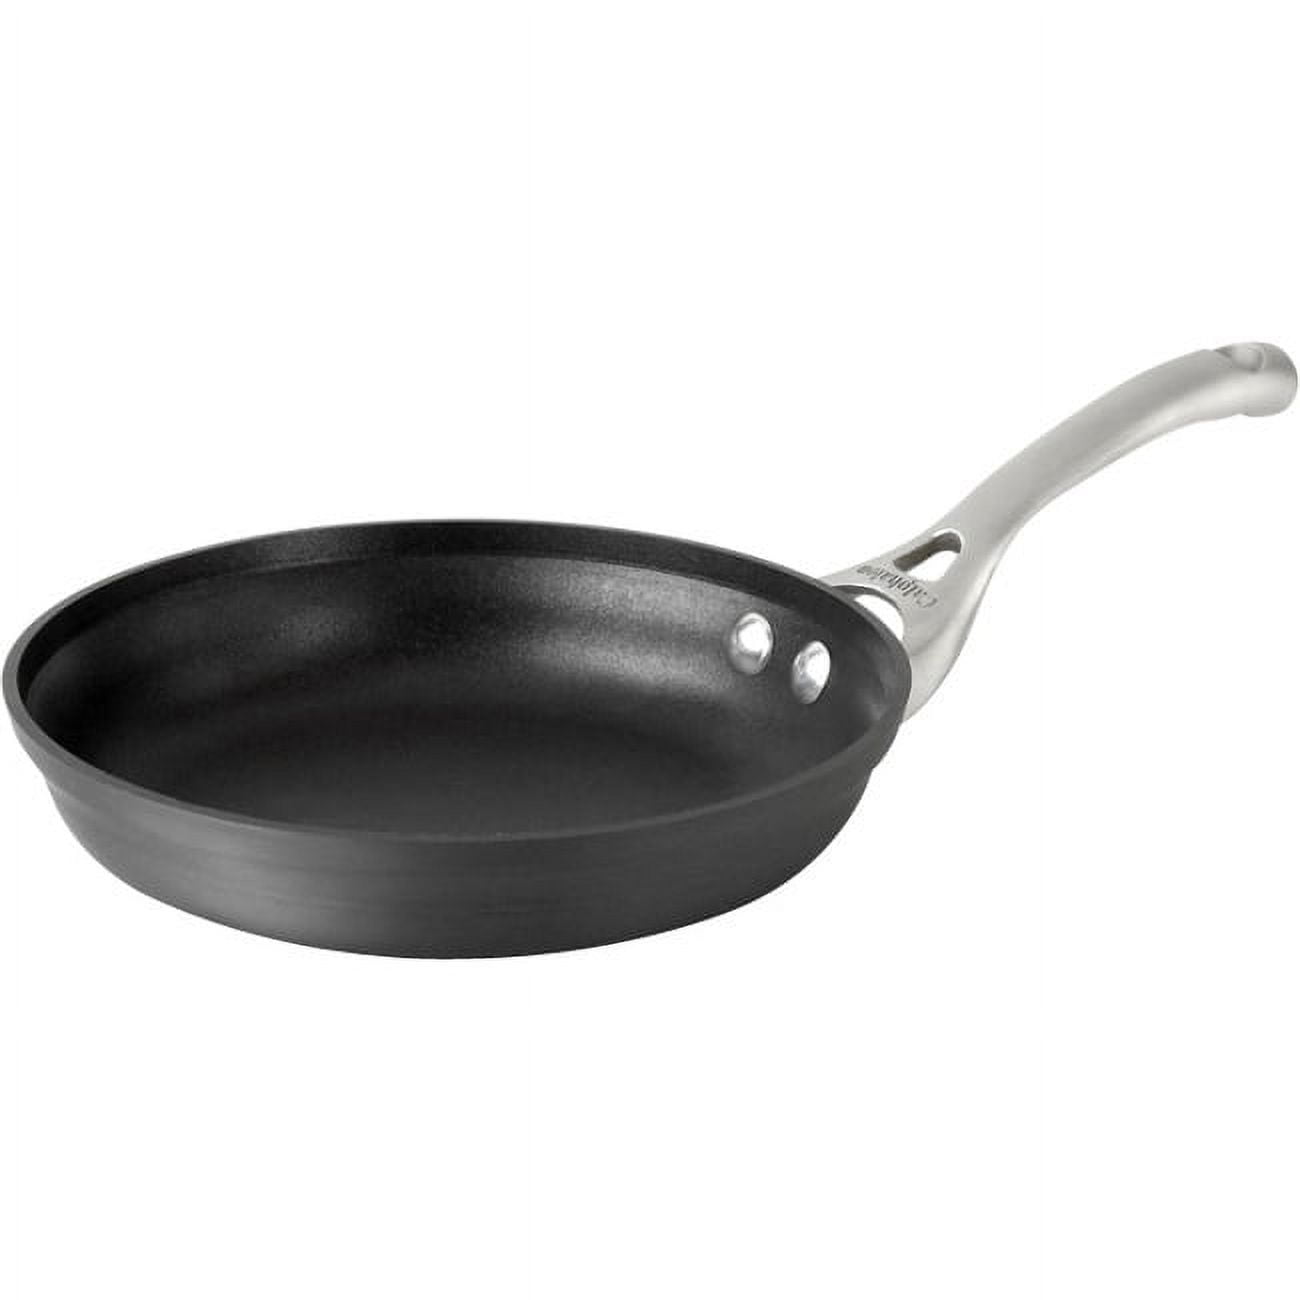 Calphalon Unison Nonstick 8-Inch and 10-Inch Omelette Pan Set,Black